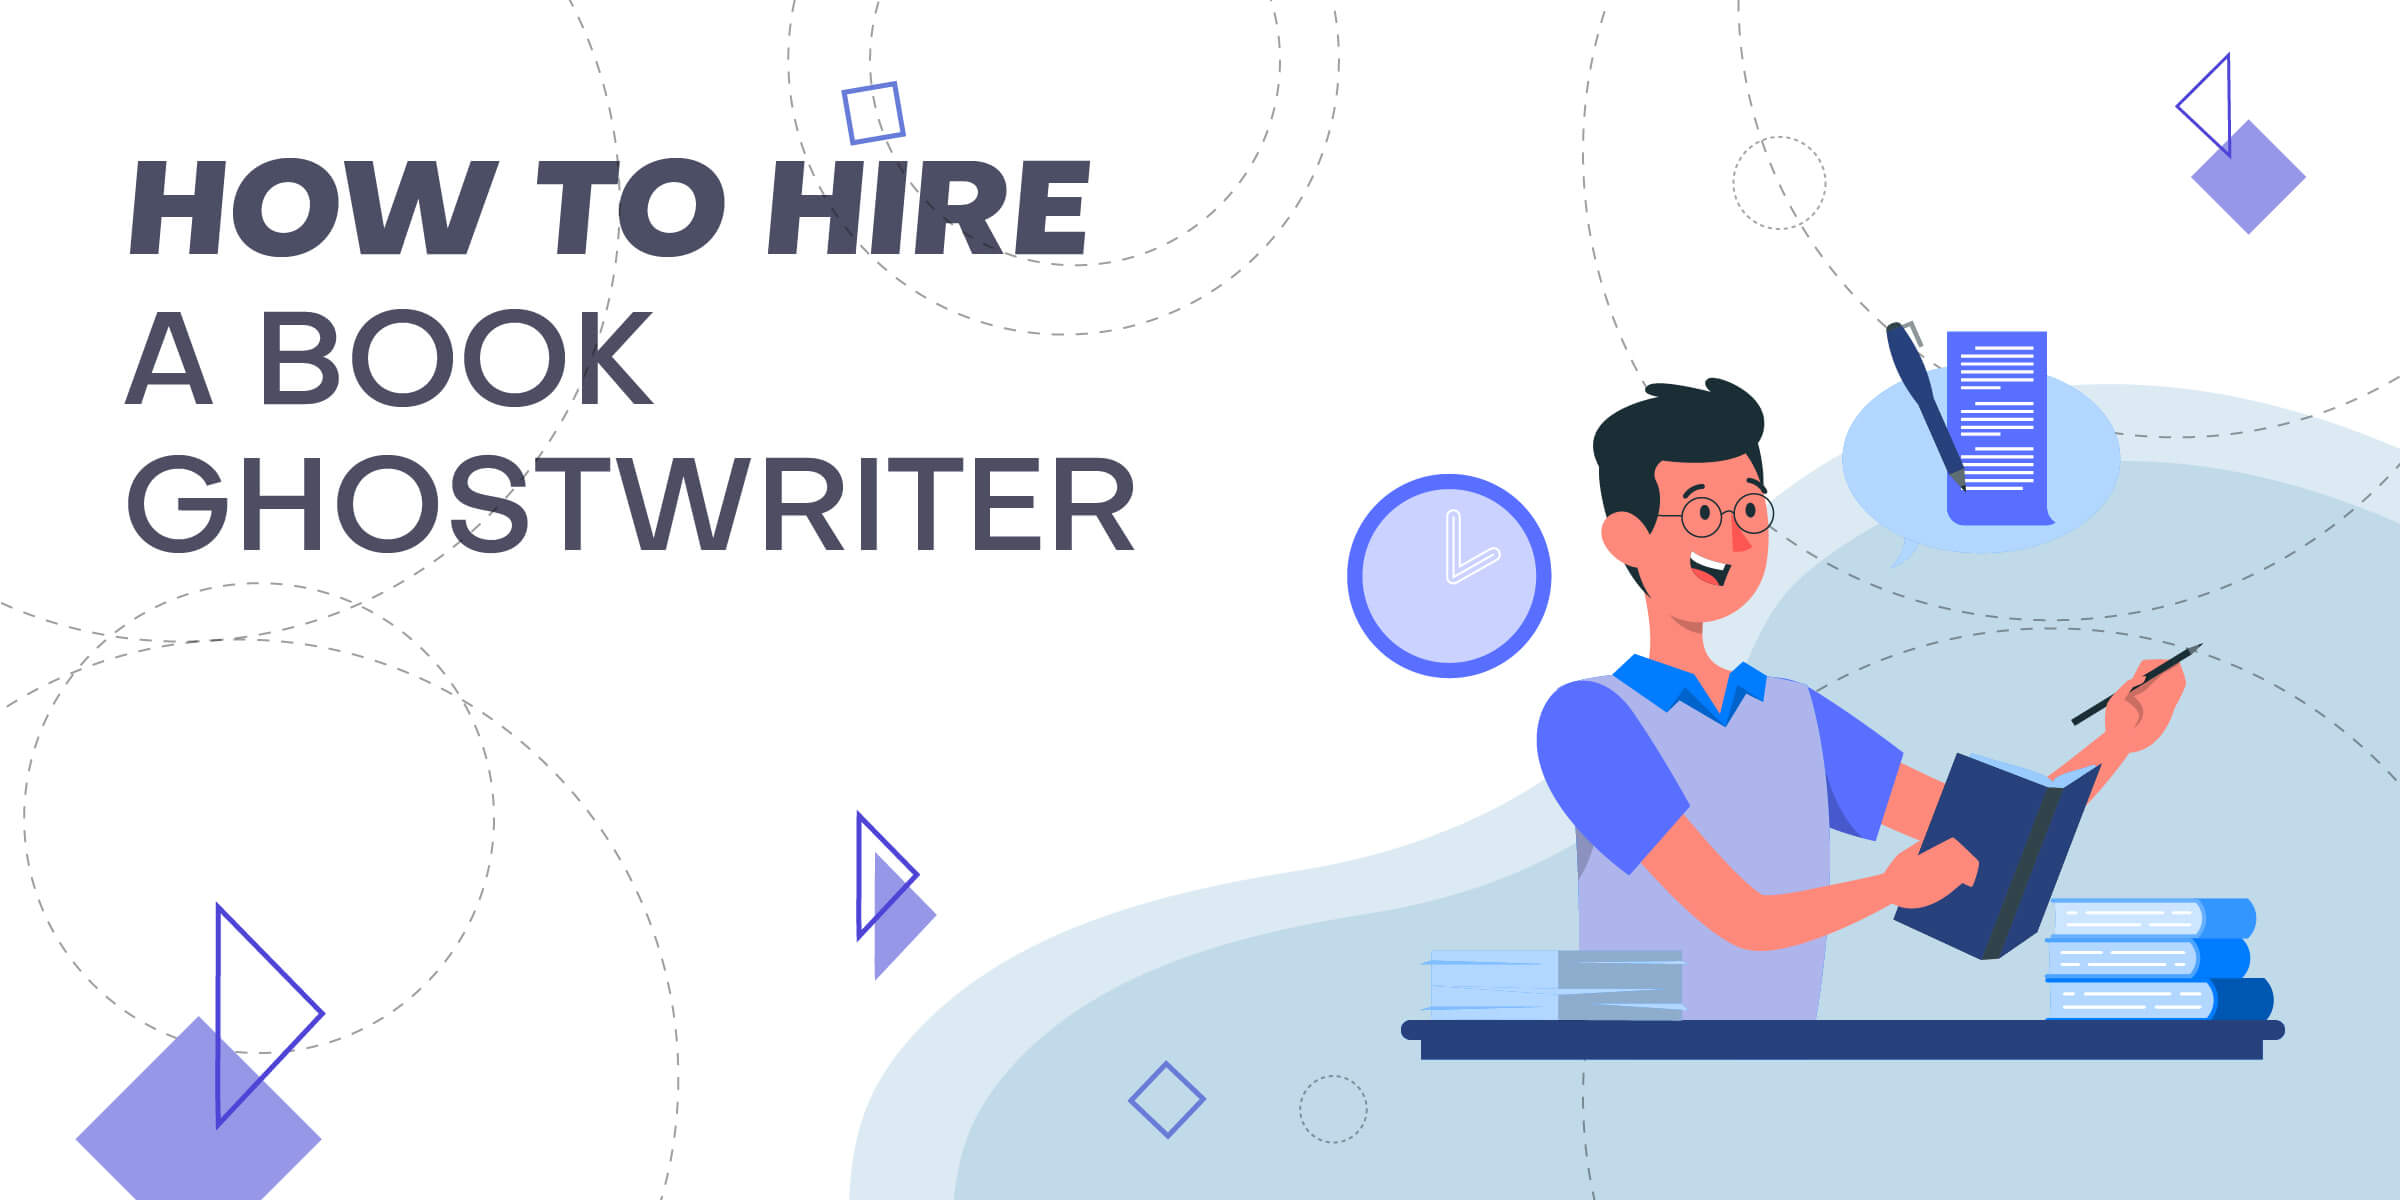 How to Hire a Book Ghostwriter